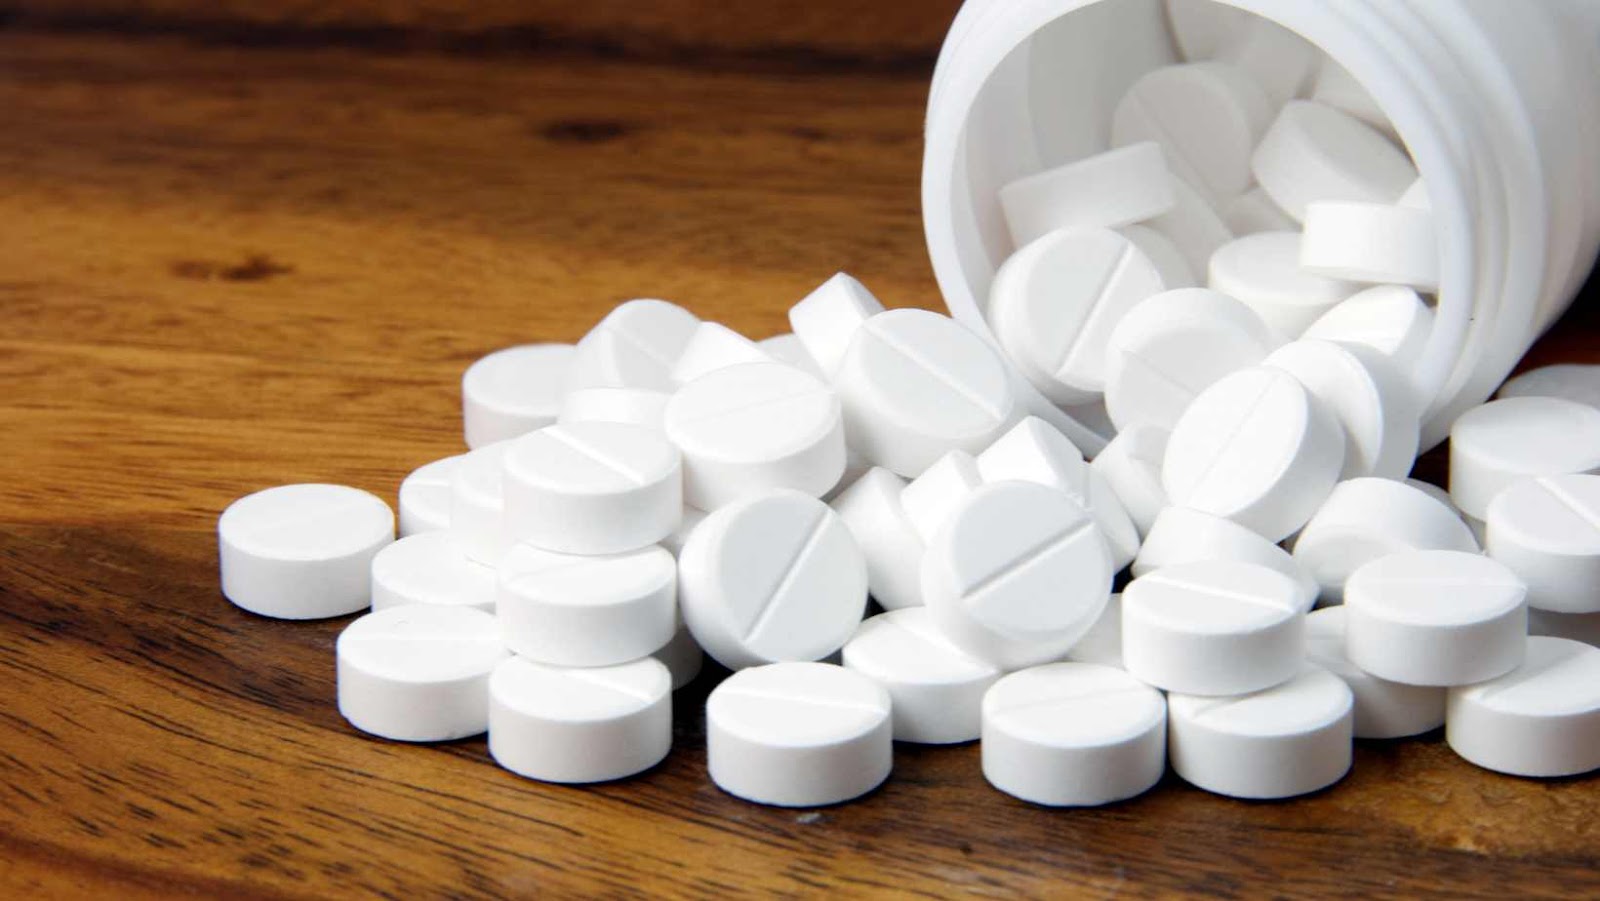 What Are The Precautions Of Acetaminophen?